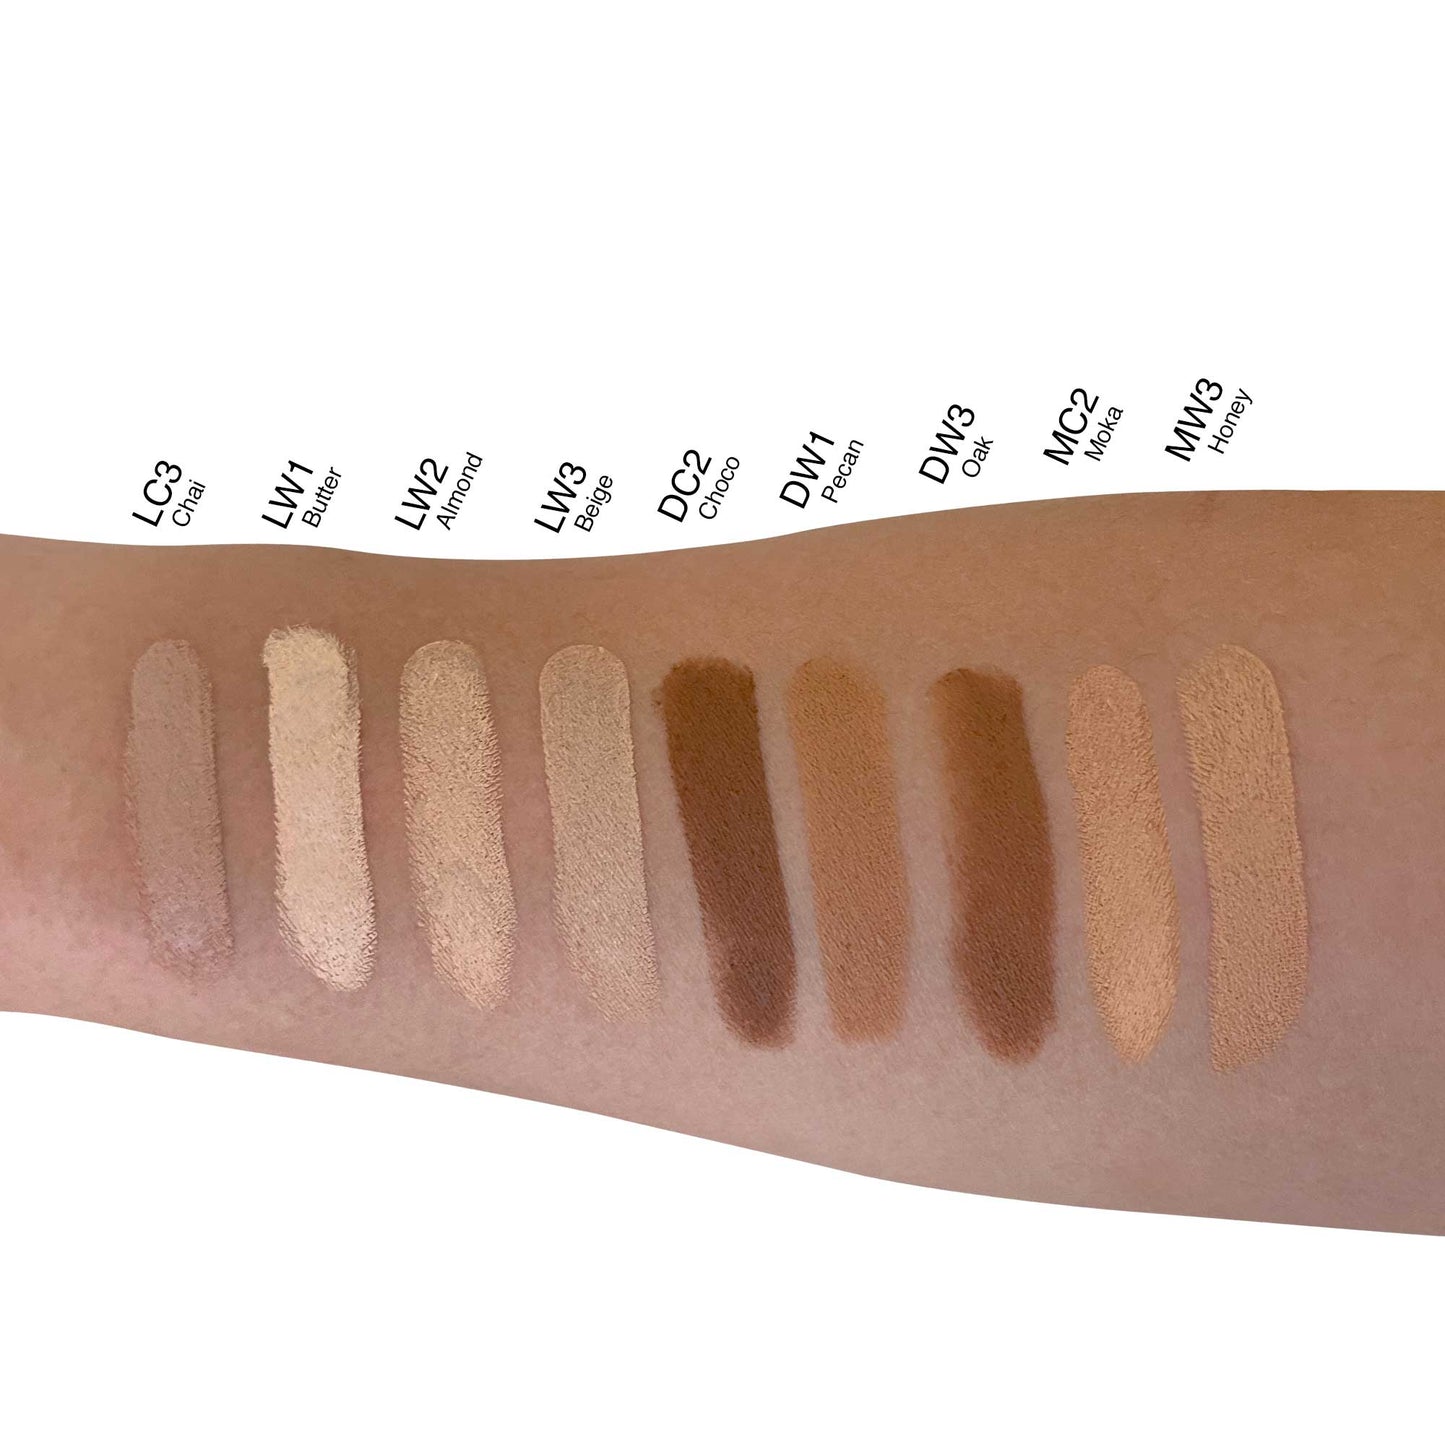 This Cruisin Organics Beige Creme Concealer Stick effectively covers blemishes and dark spots. Its natural formula is gentle on the skin and provides a natural-looking coverage that lasts all day. Formulated by industry experts, this concealer is perfect for those seeking a natural and flawless look.